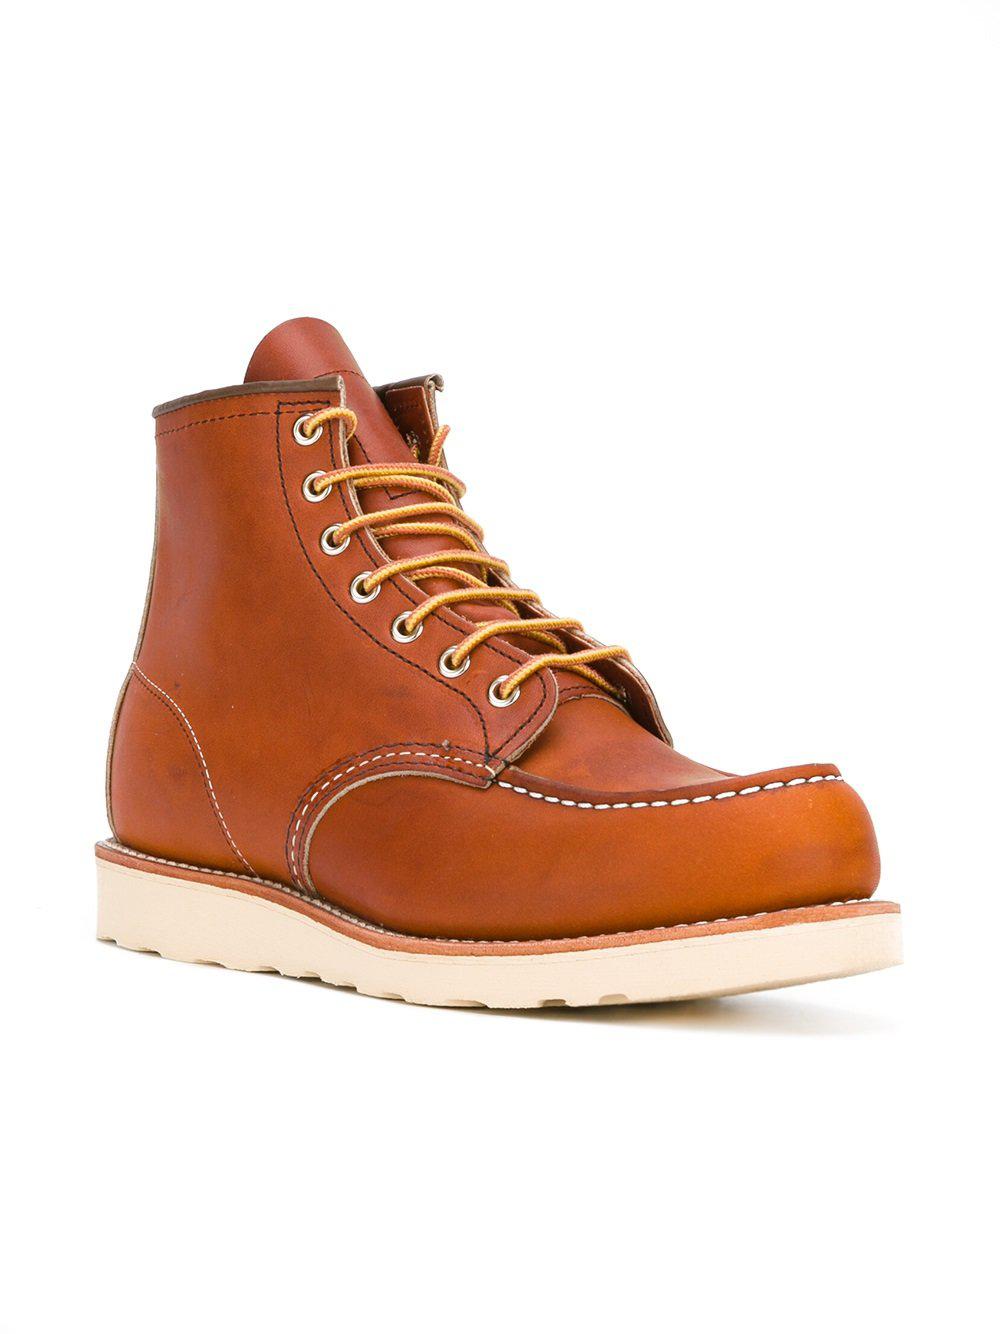 Lyst - Red Wing Stitching Detail Lace-up Boots in Brown for Men